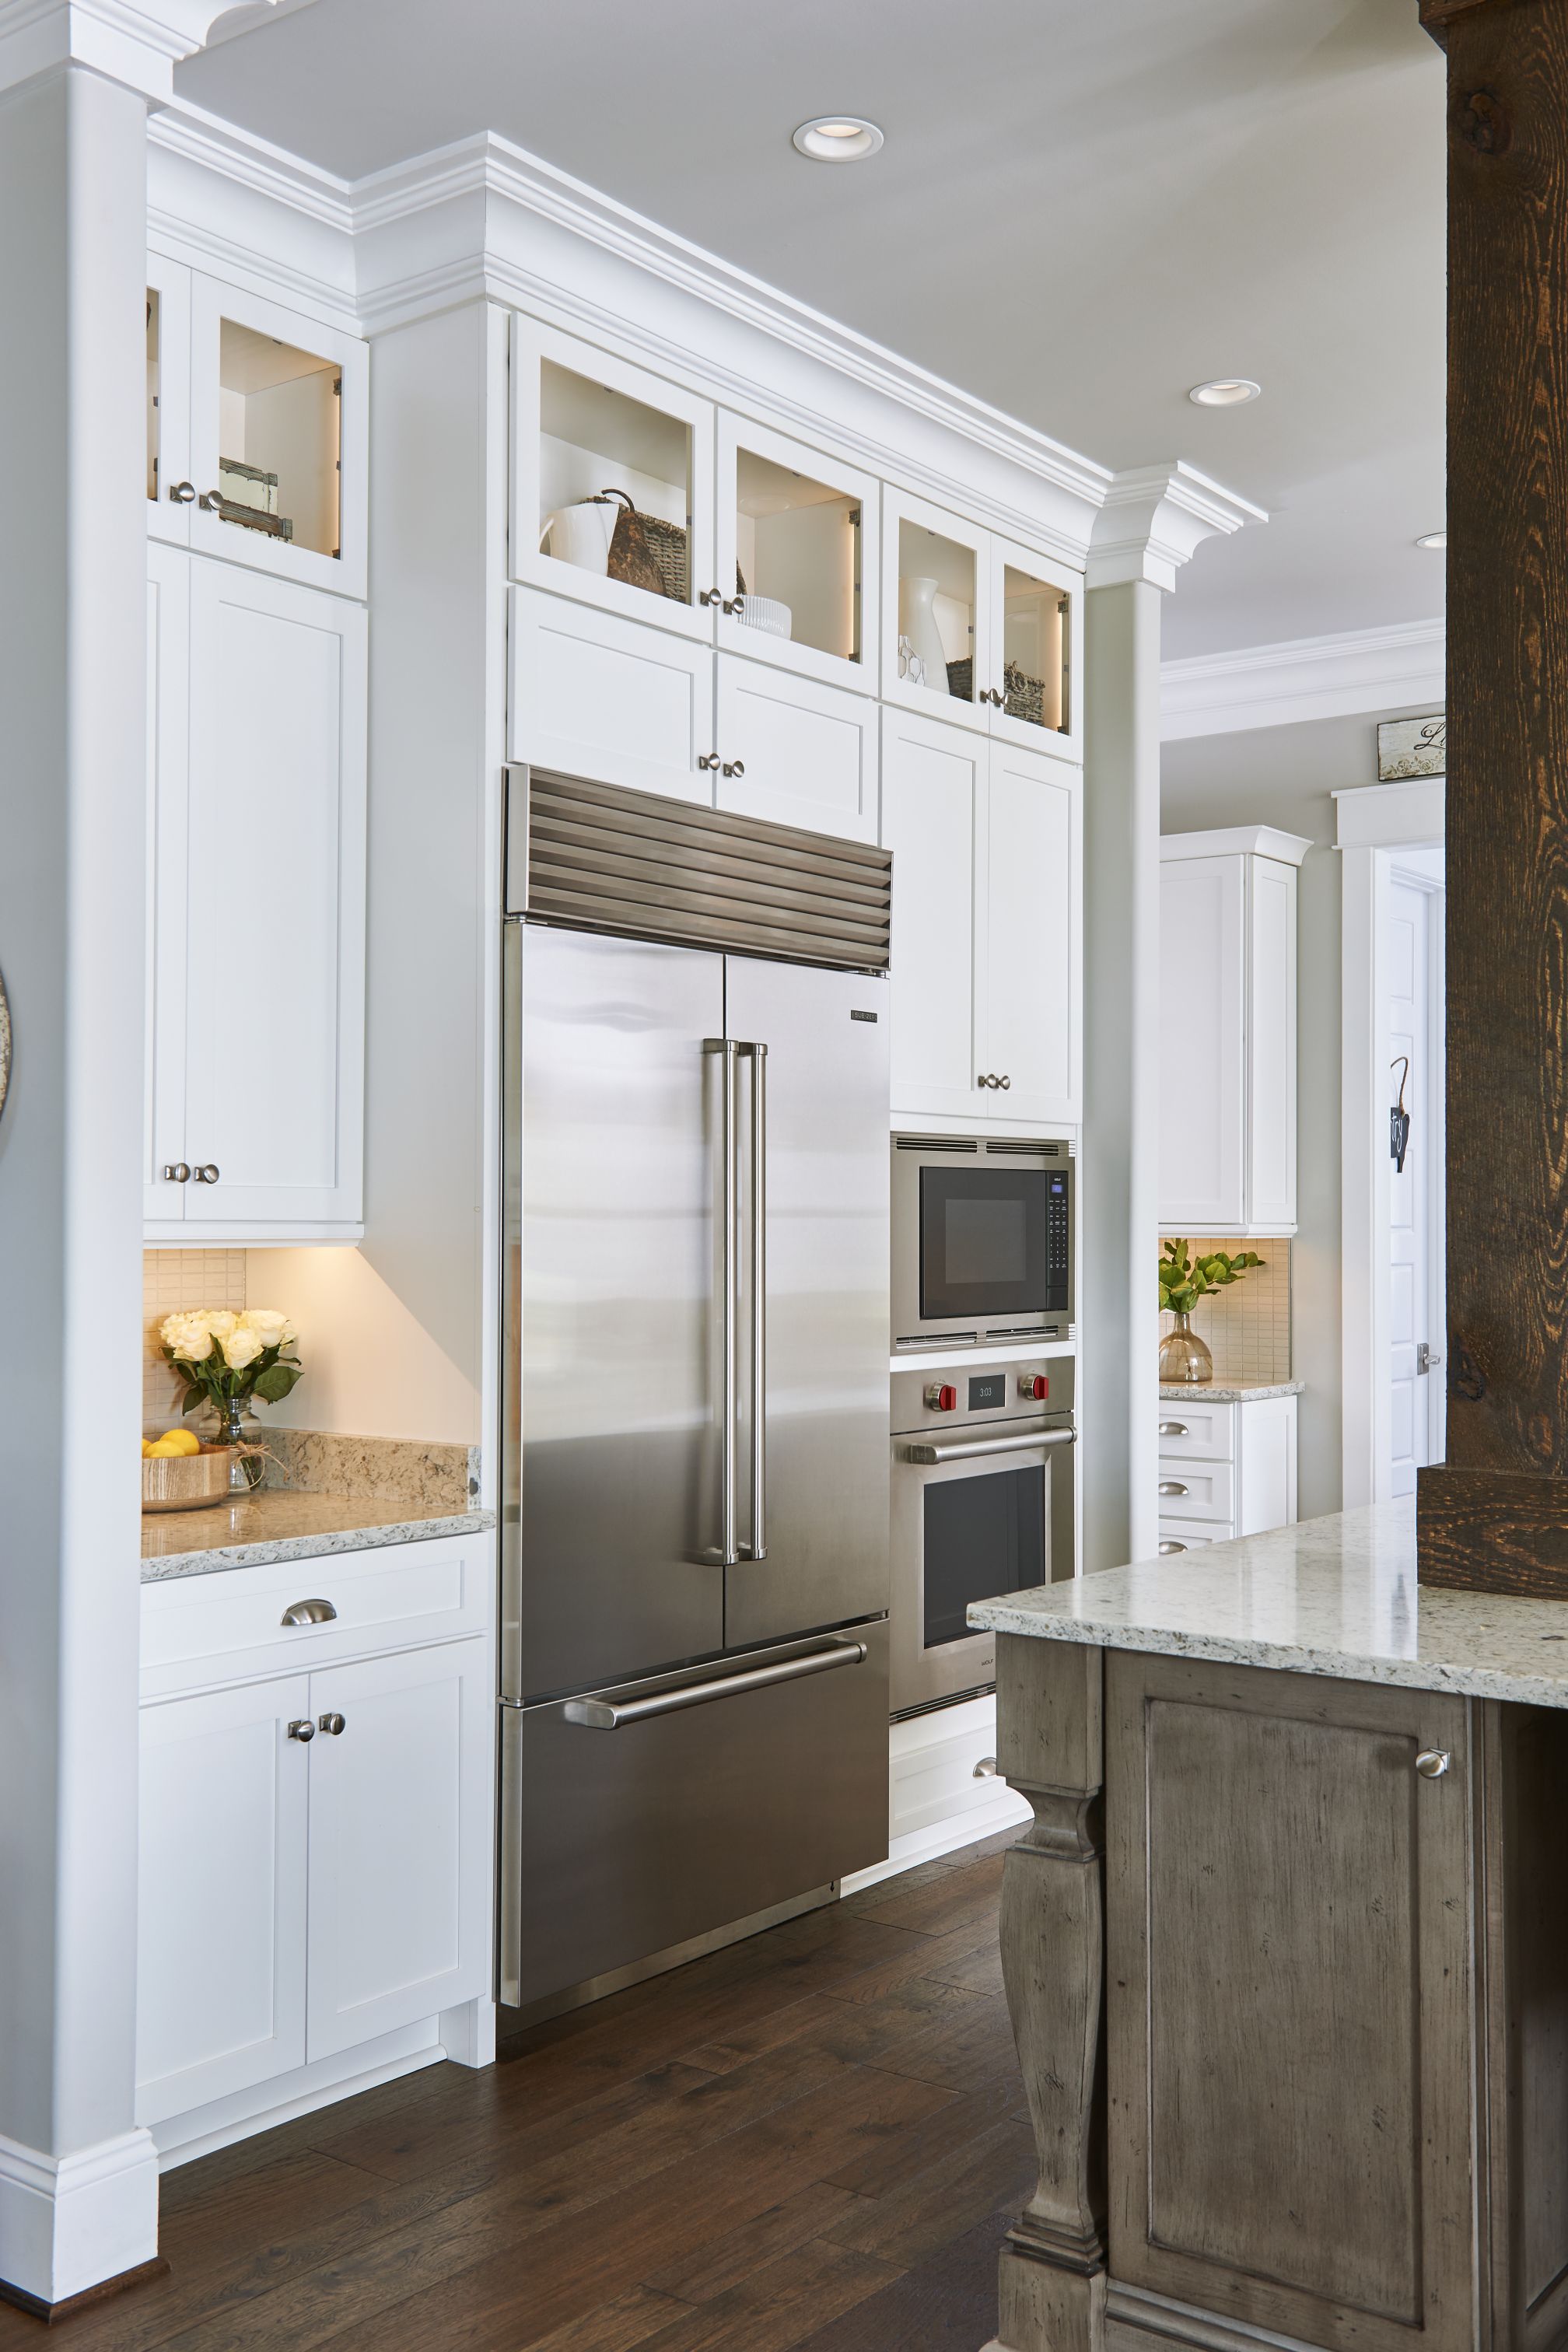 Medallion Cabinetry - Classic White with a Twist